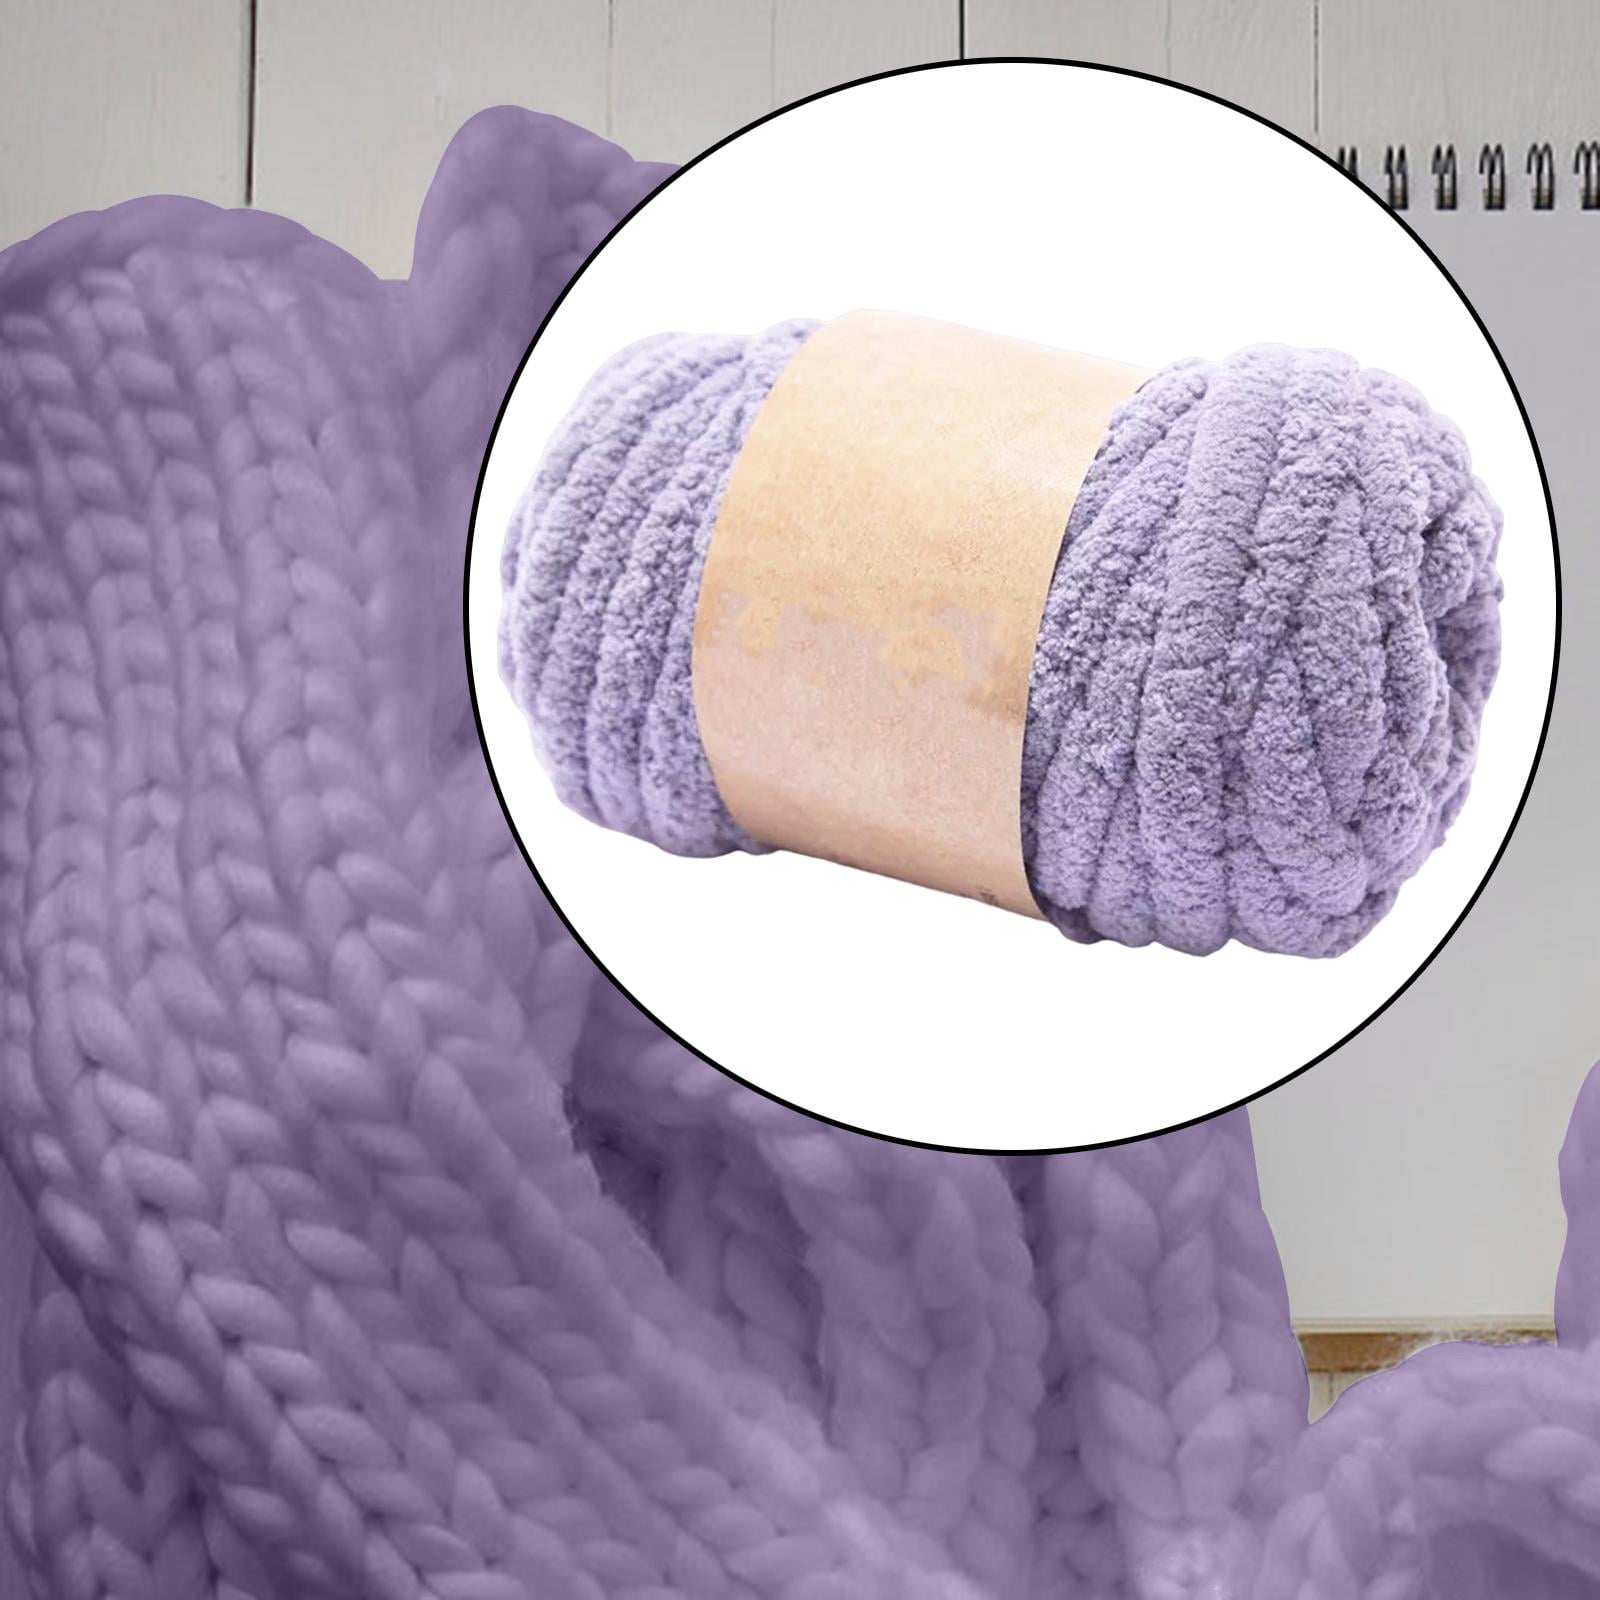 Chunky Yarn, Super Soft, Lightweight, Durable, Comfortable, Washable Jumbo  Yarn for Crocheting Pet Bedspreads , Violet